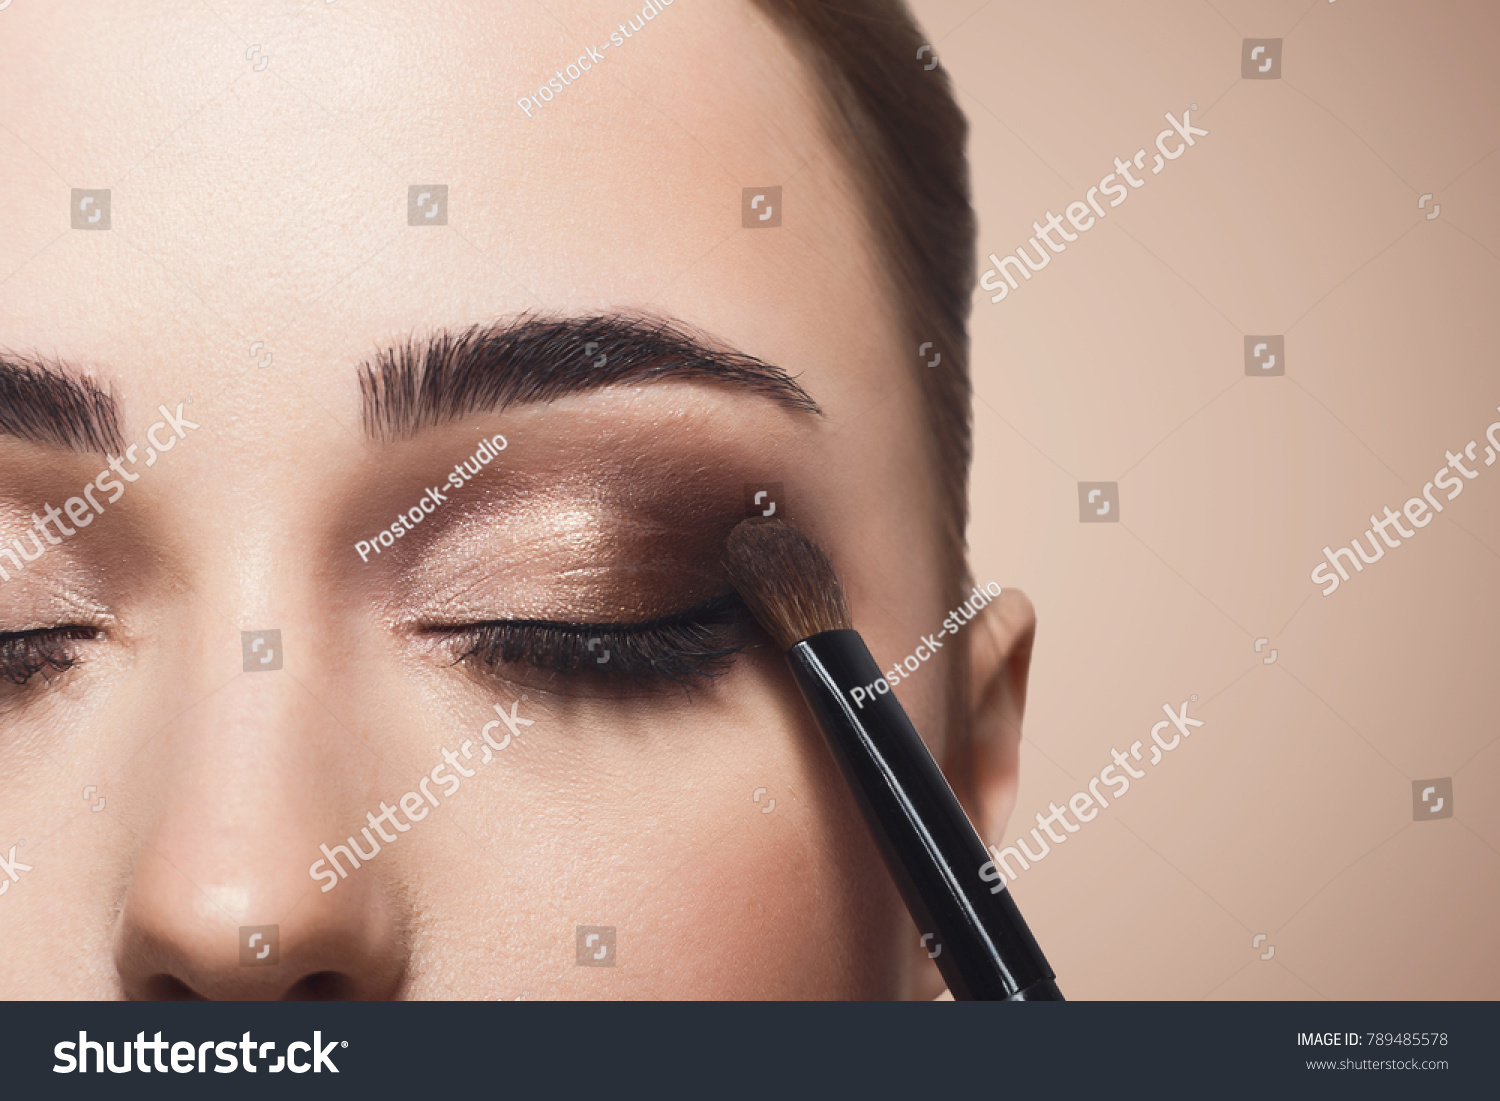 Eyeshadow applying, makeup for eyes closeup. Female model face with fashion make-up, beauty concept #789485578